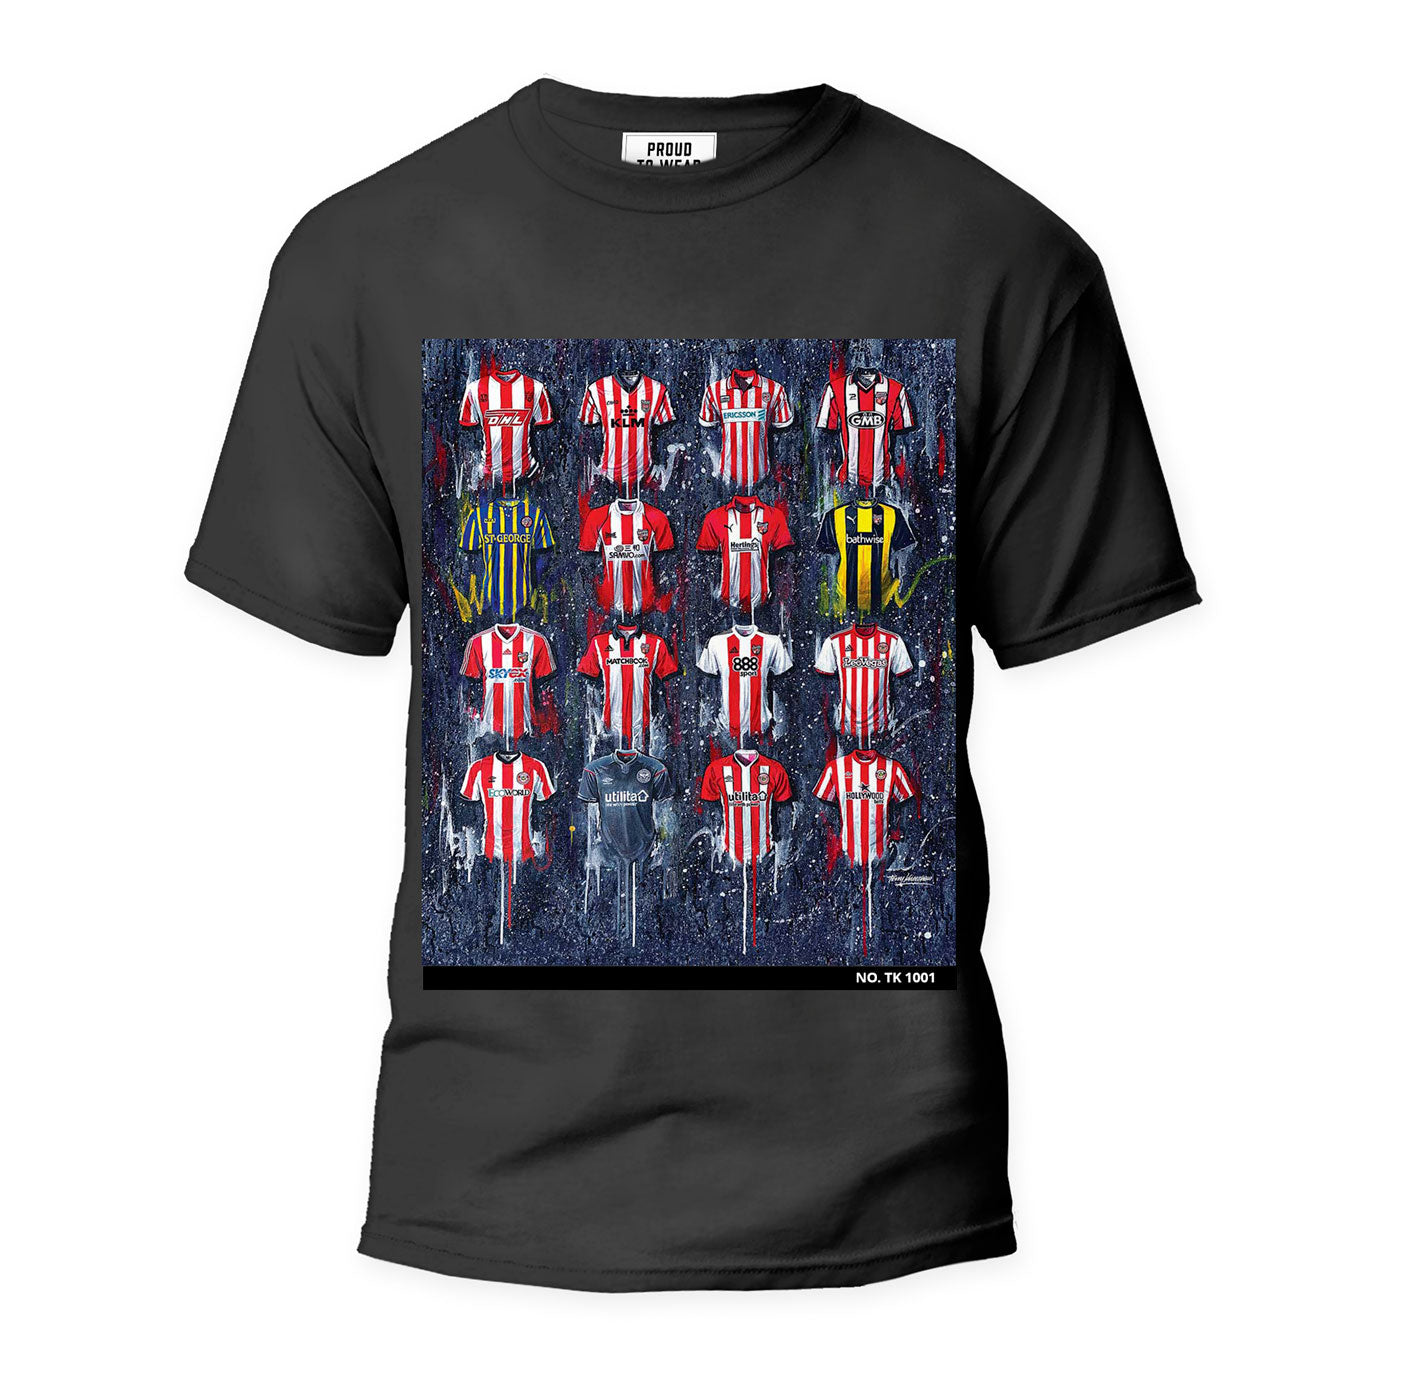 These Brentford T-shirts are one-of-a-kind and individually numbered, featuring Terry Kneeshaw's artwork for the team. They are available in sizes xxs - xxxl and come in a choice of black or white T-shirt. These limited edition prints showcase the history and achievements of Brentford FC in a unique and stylish way, making them a must-have for any fan. Get yours today and show your support for the Bees in a truly special way!